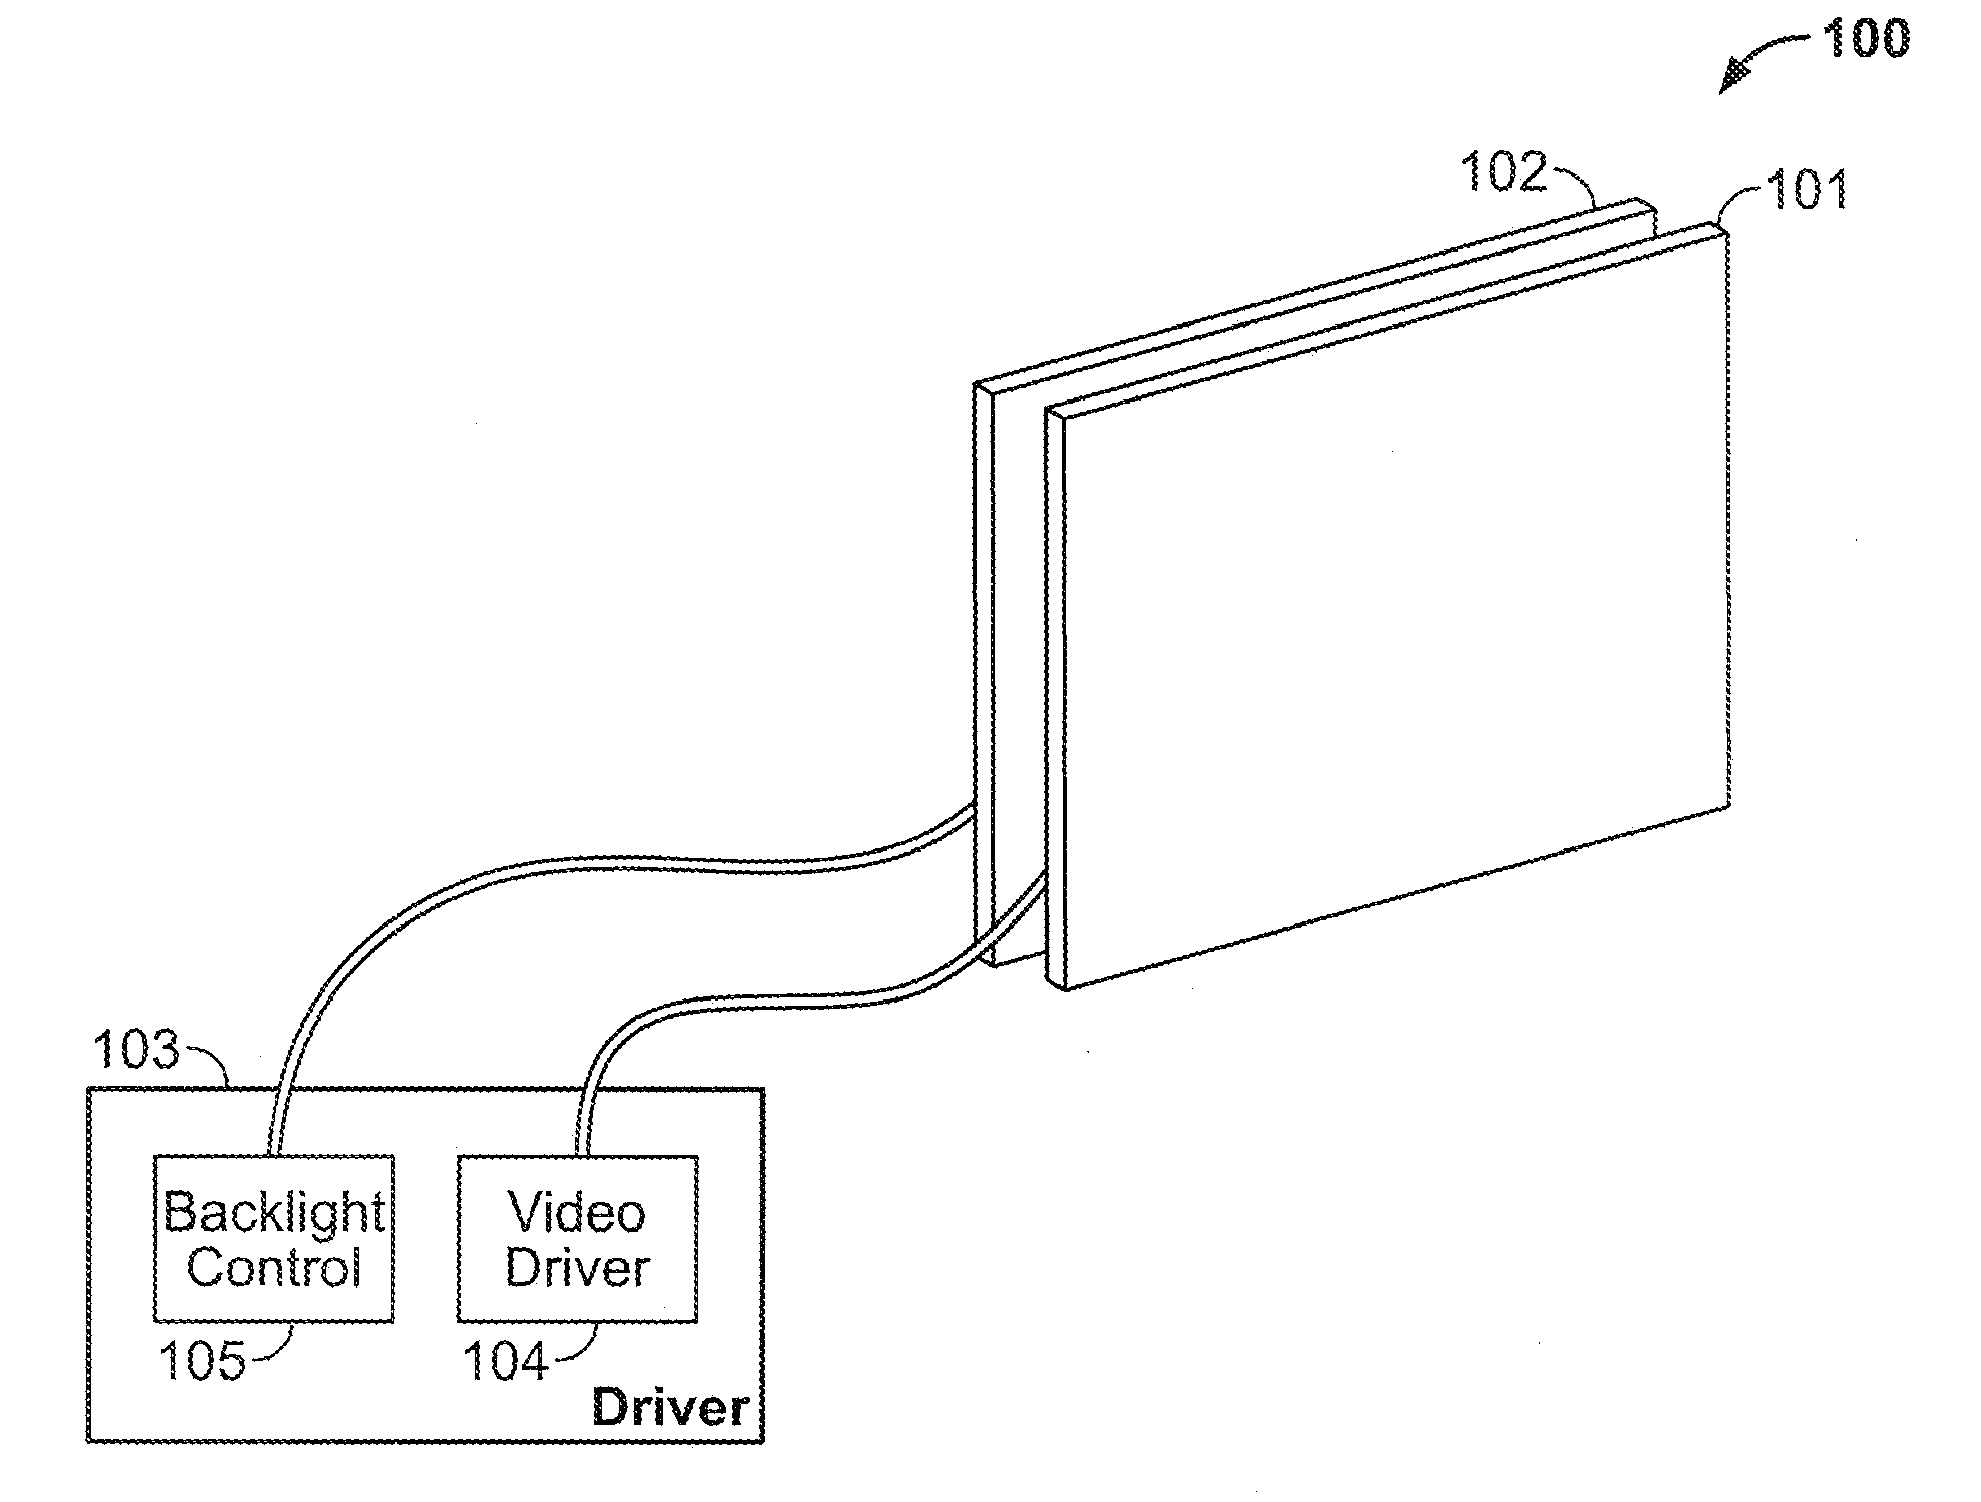 Pulse-width modulation control for backlighting of a video display